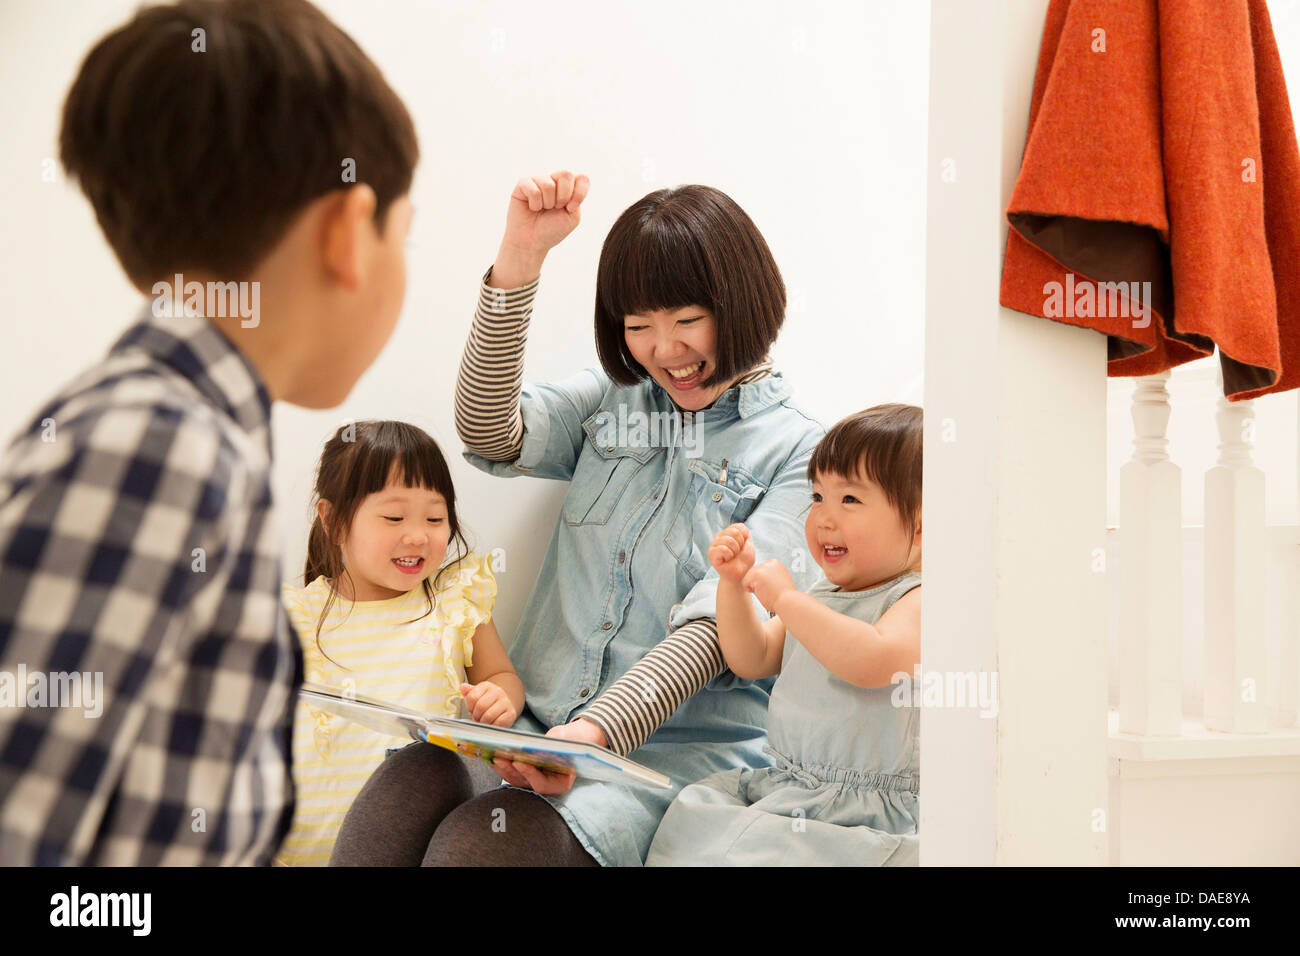 Mother and children laughing at storybook Stock Photo